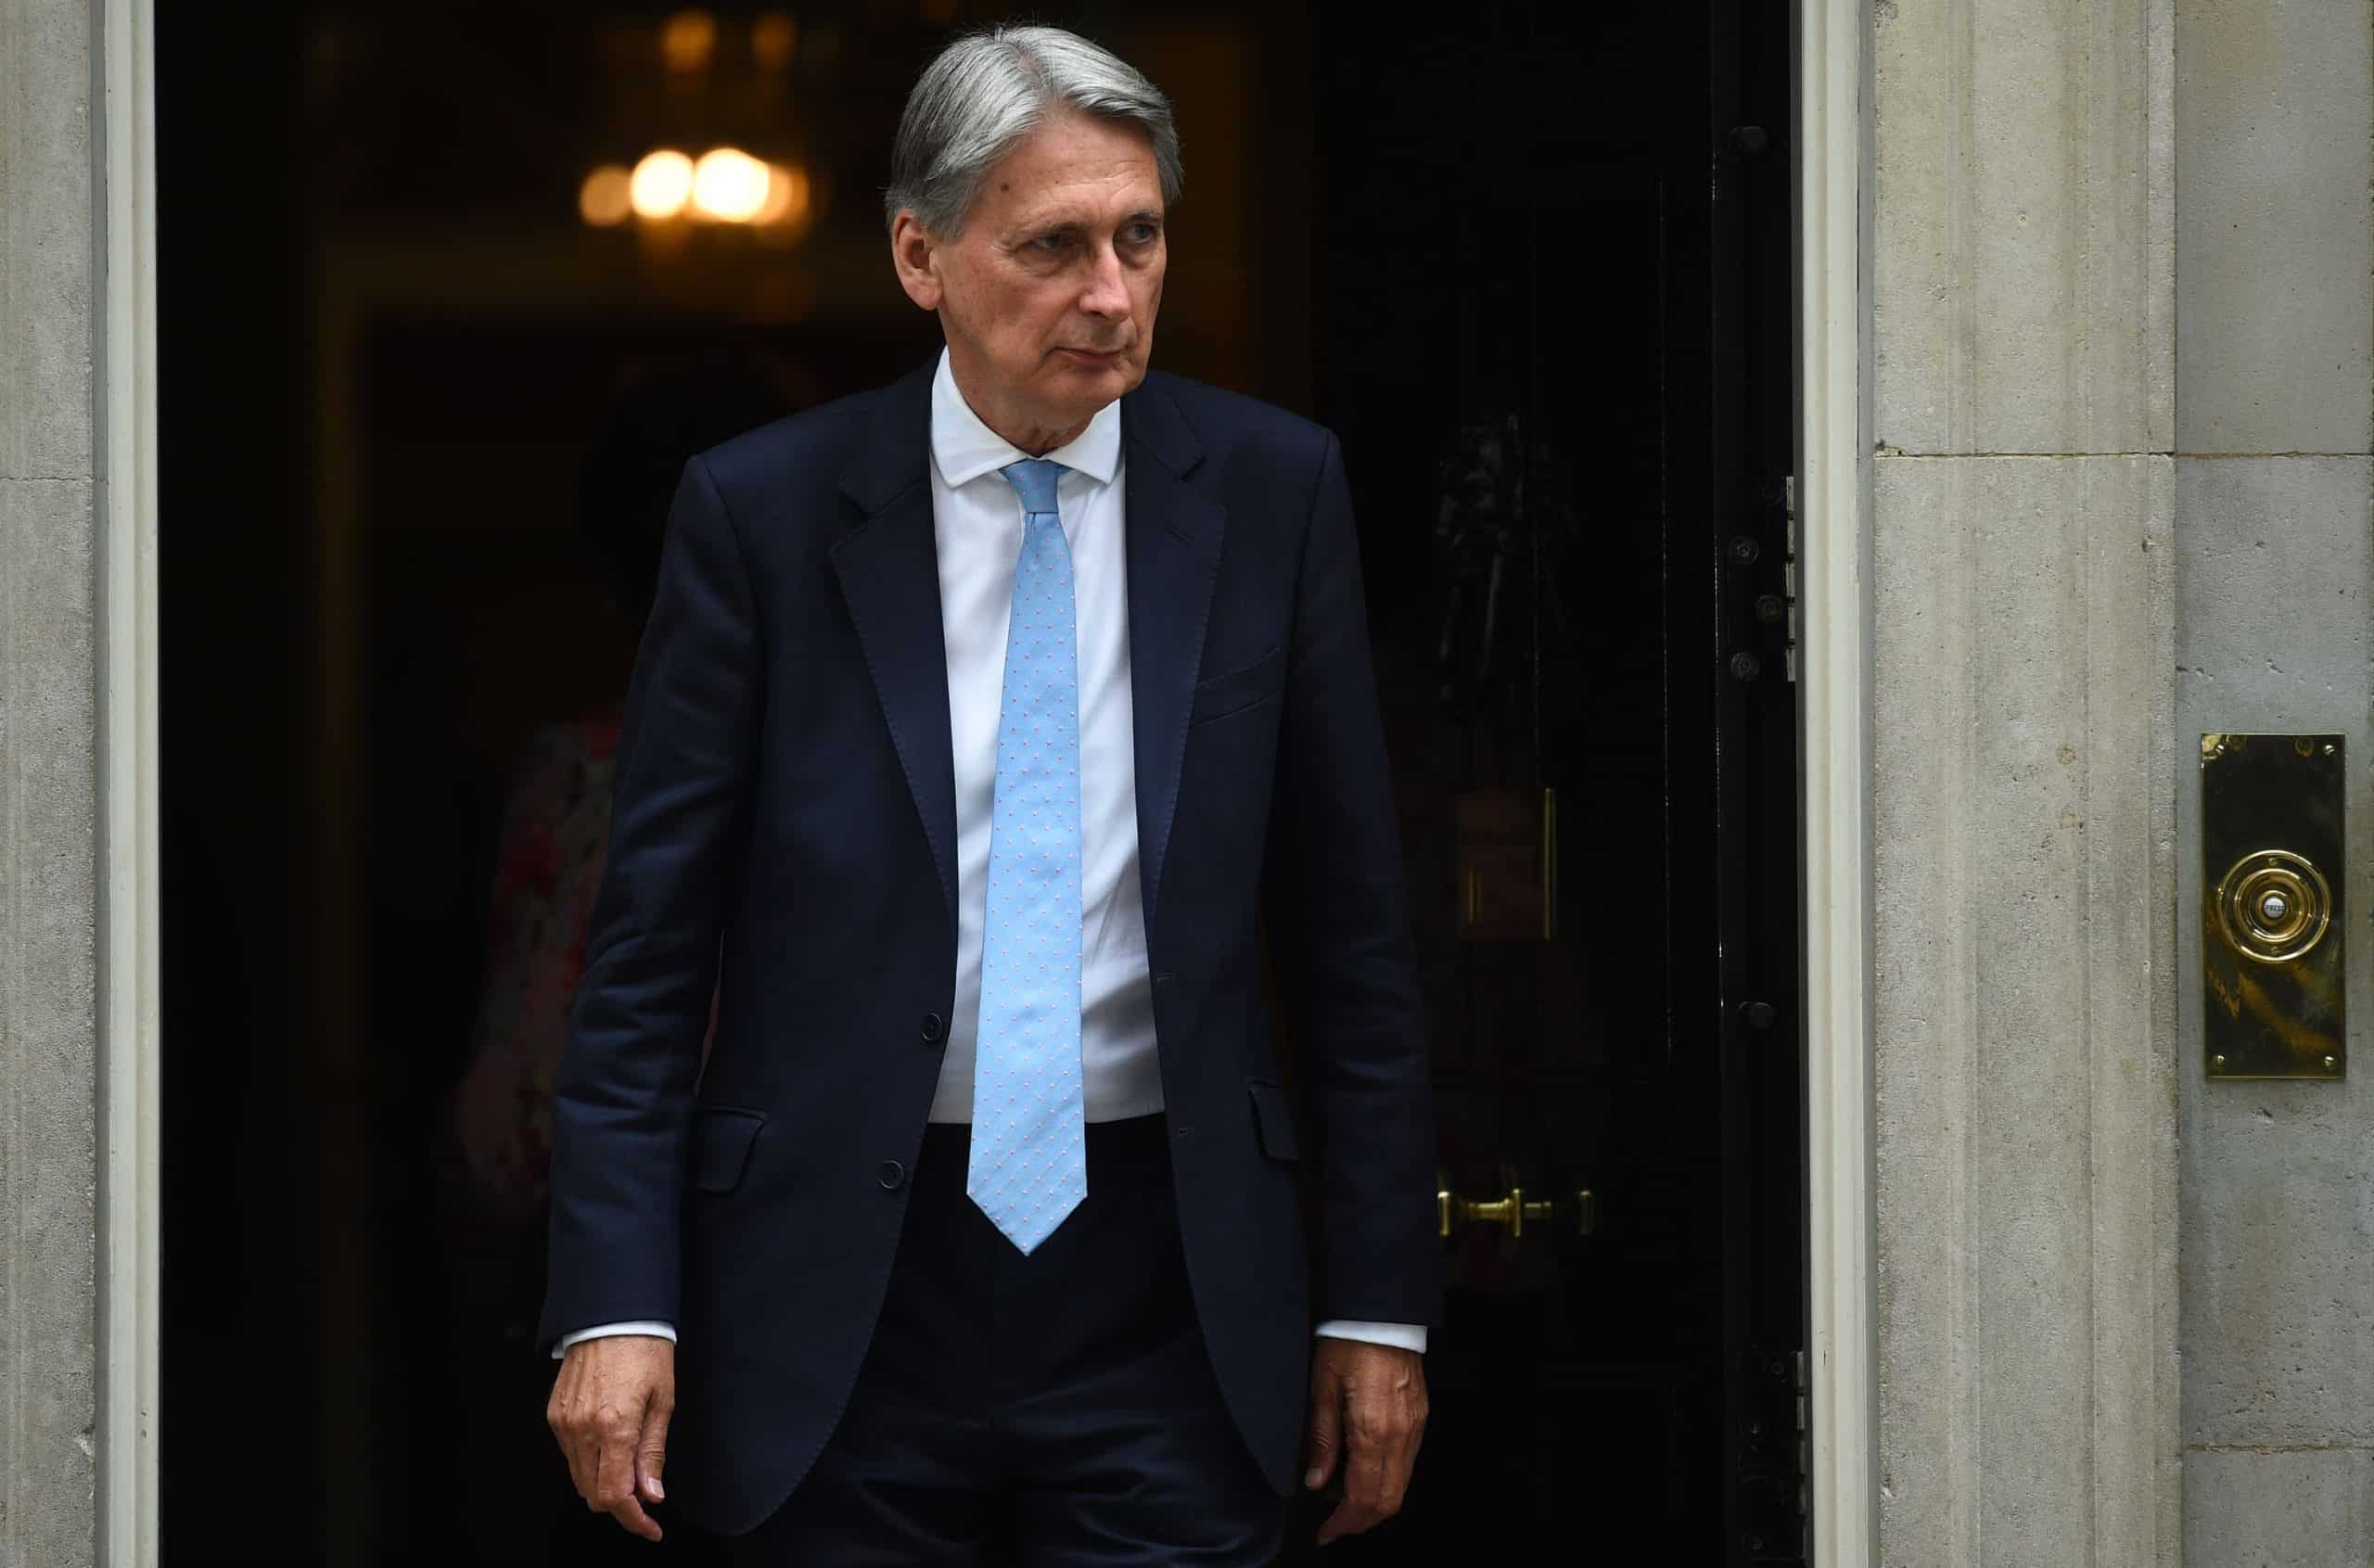 Government’s growth agenda is in tatters, says ex-chancellor Lord Hammond